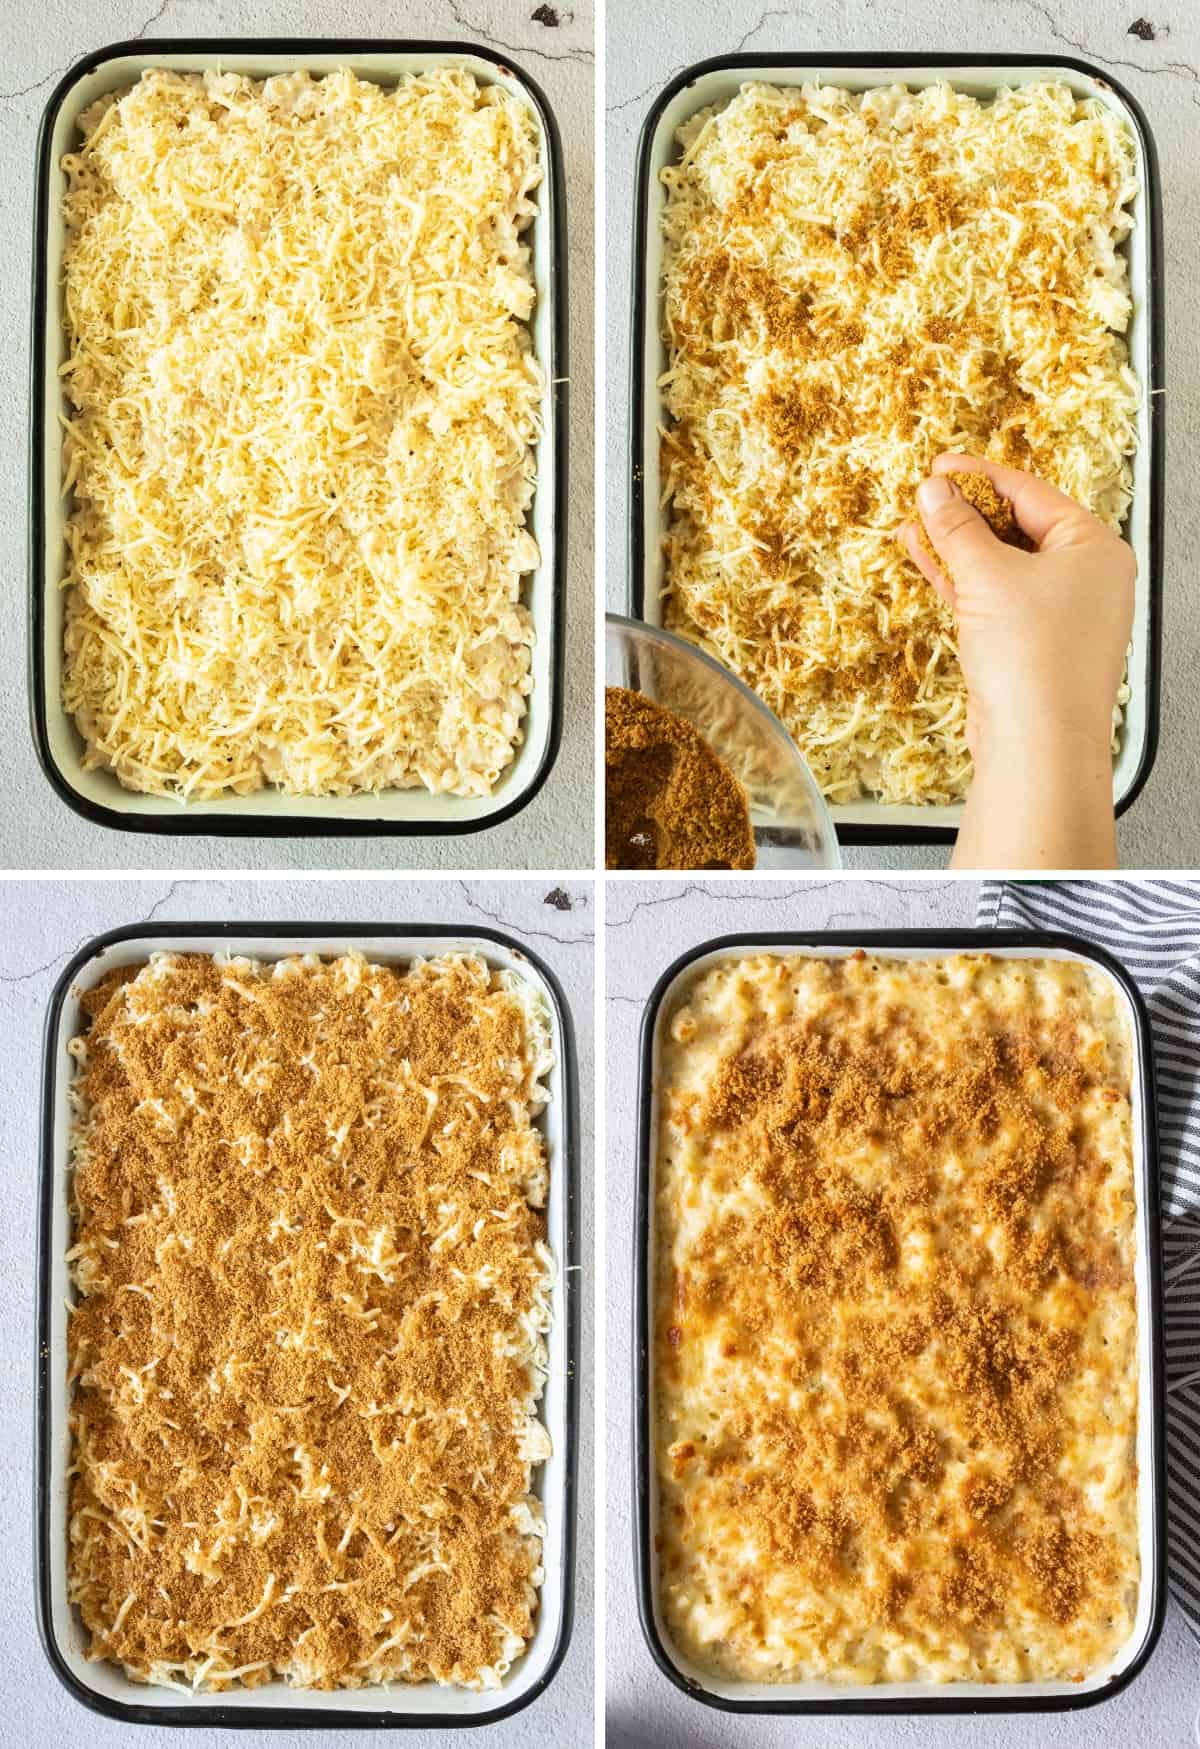 Assembling the pasta and cheese sauce in a baking dish.